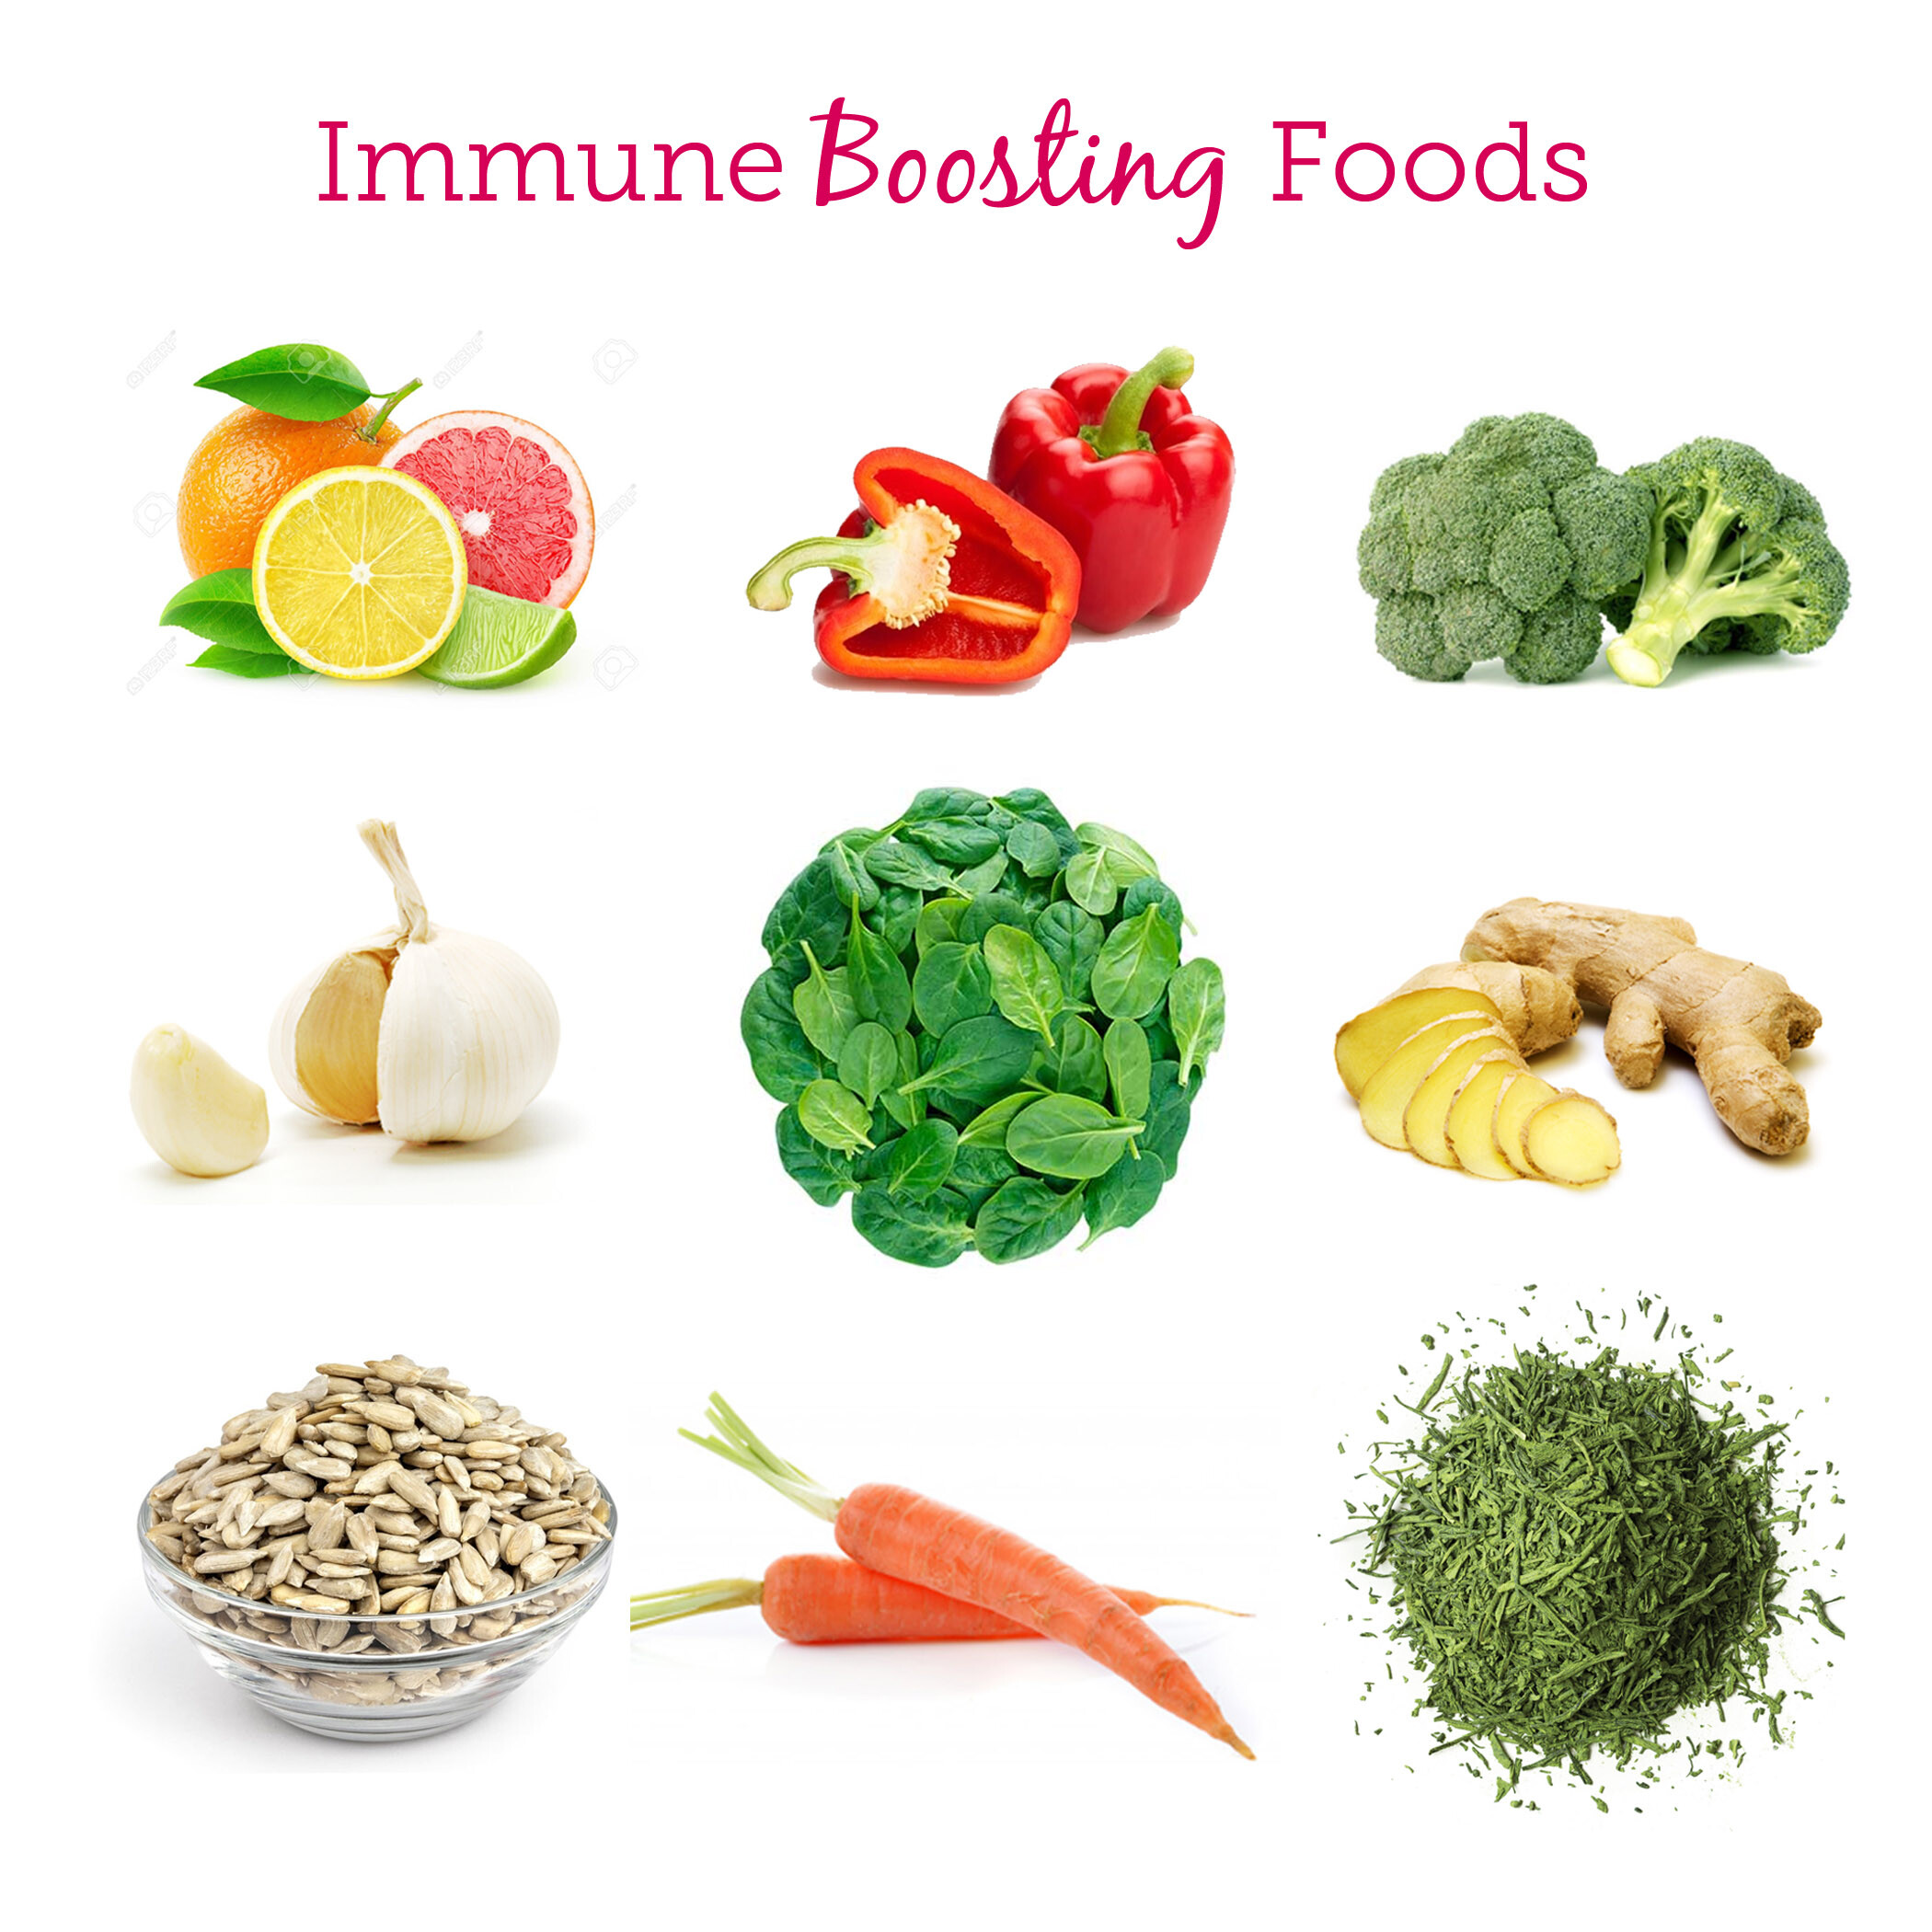 Foods To Boost Immune System Uk: More Foods To Boost Your Iune Syste During Winter...